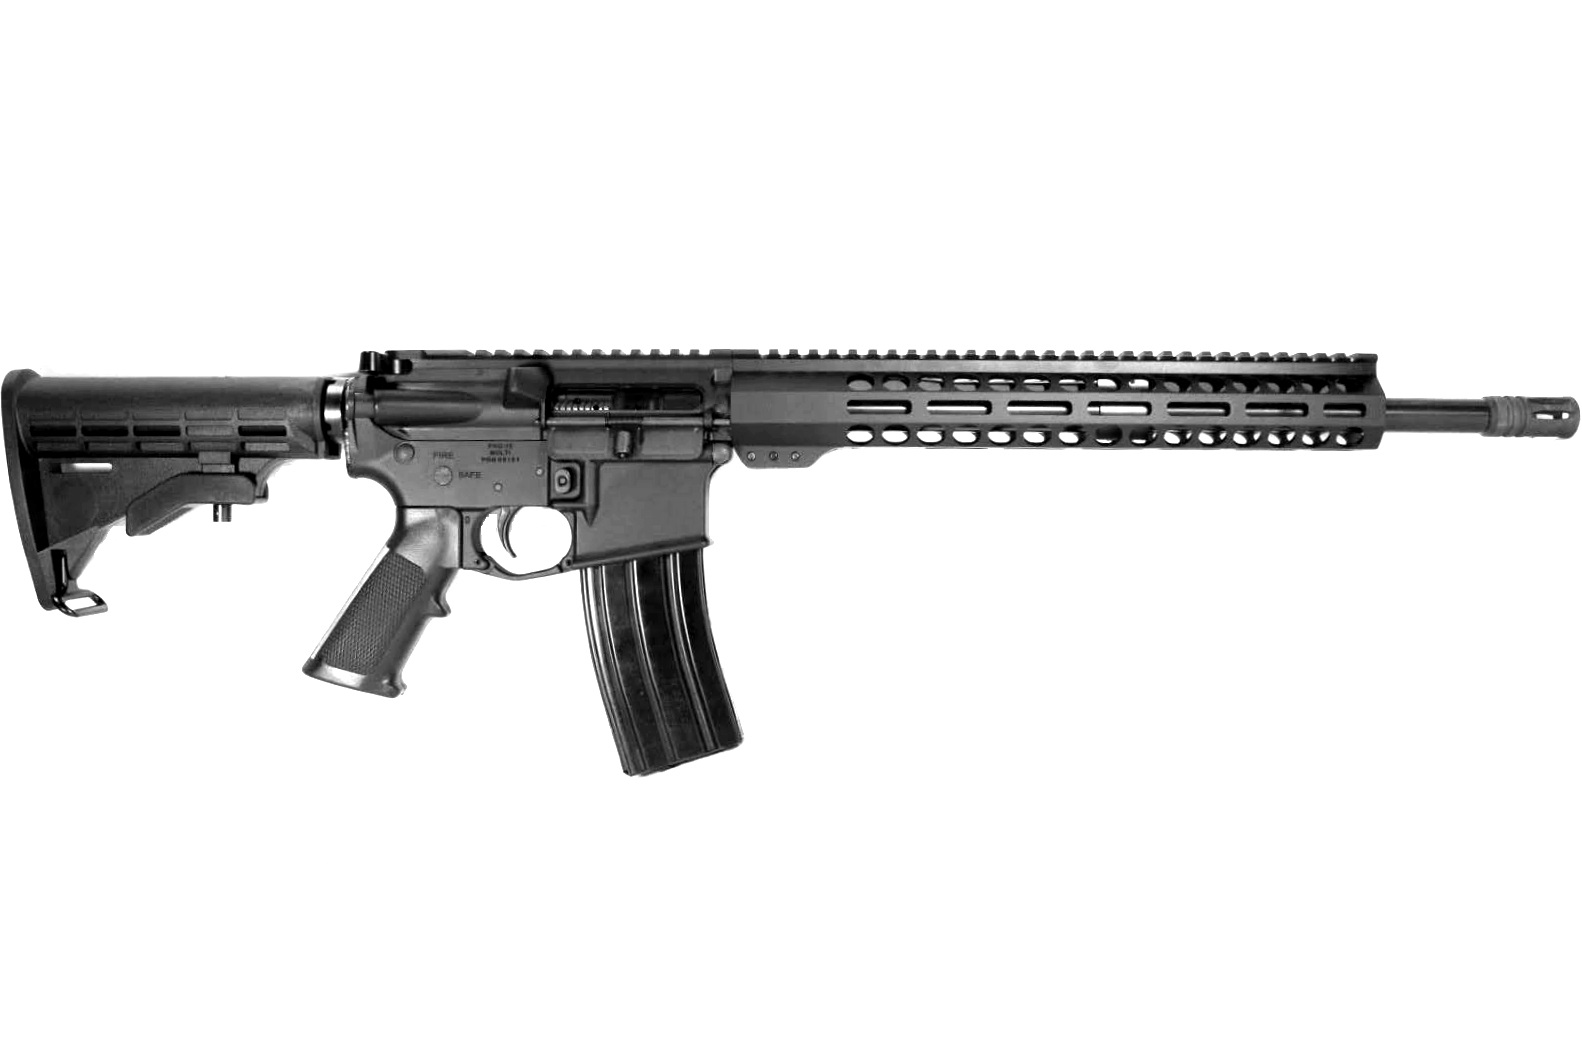 16 inch 6.8 SPC Il Rifle | Quick Shipping | USA MADE